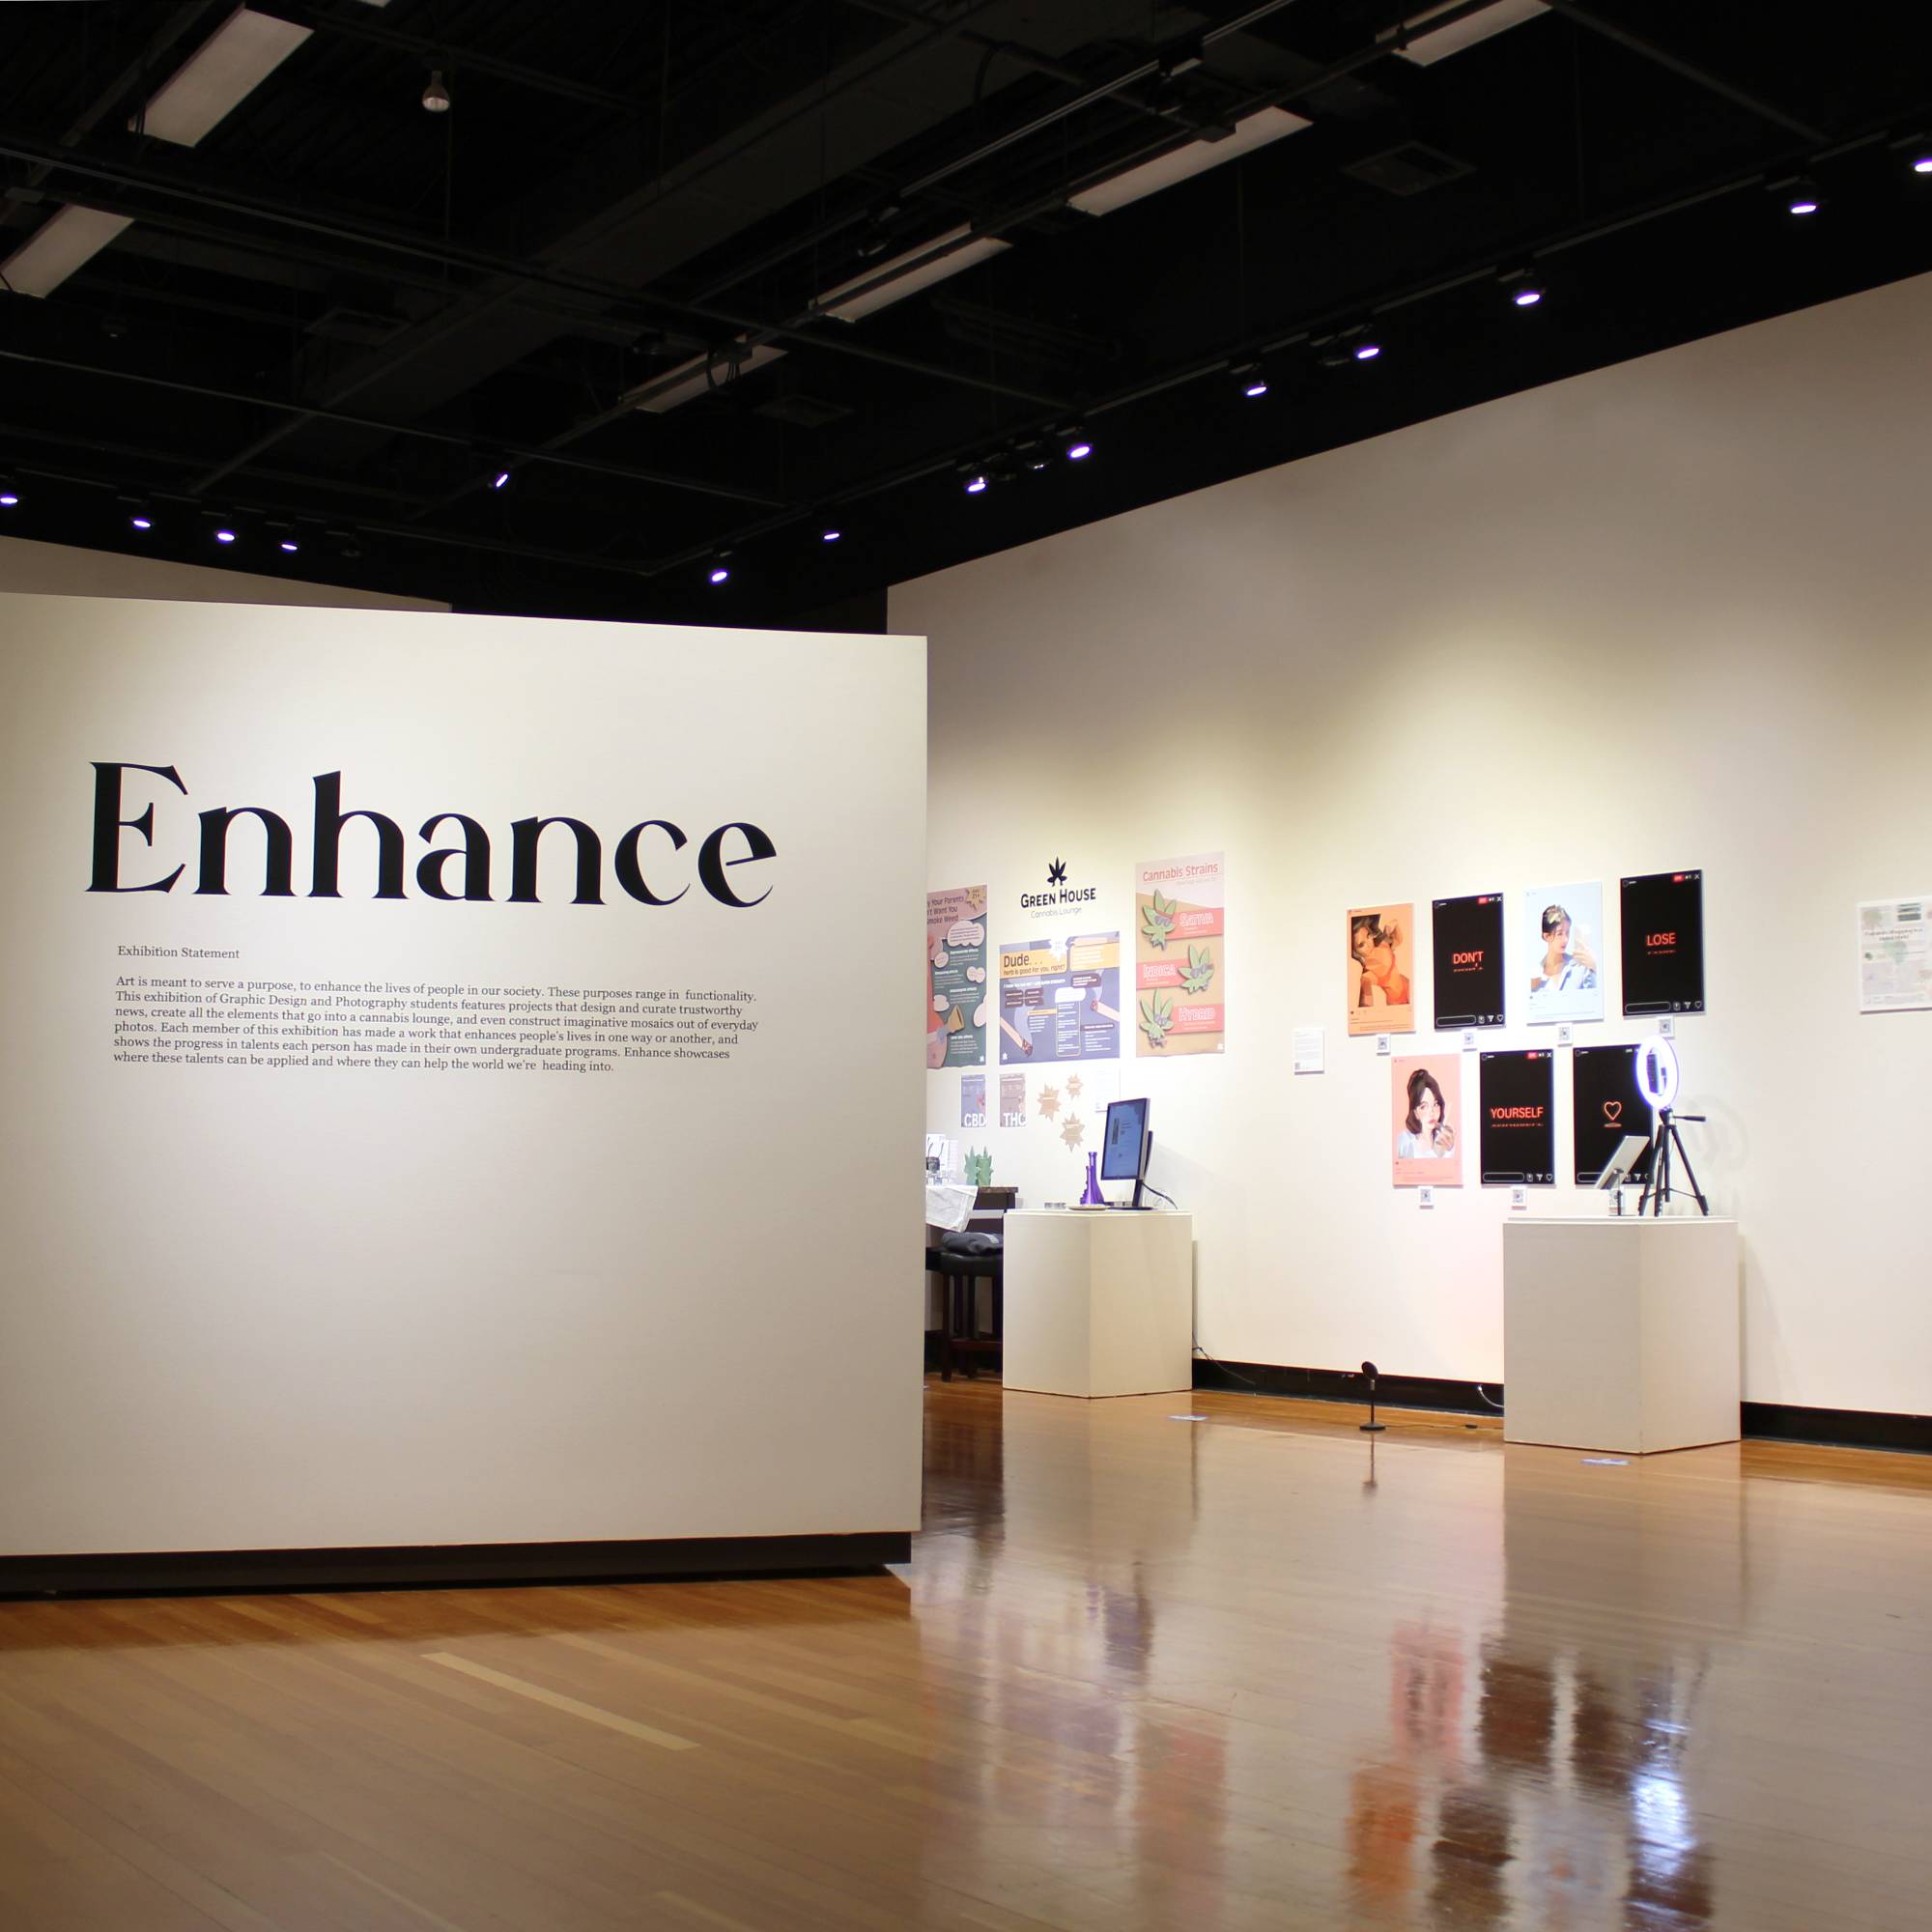 Department of Visual & Media Arts BFA Exhibition titled "Enhance" included Graphic Design Student work & Photography Student work.